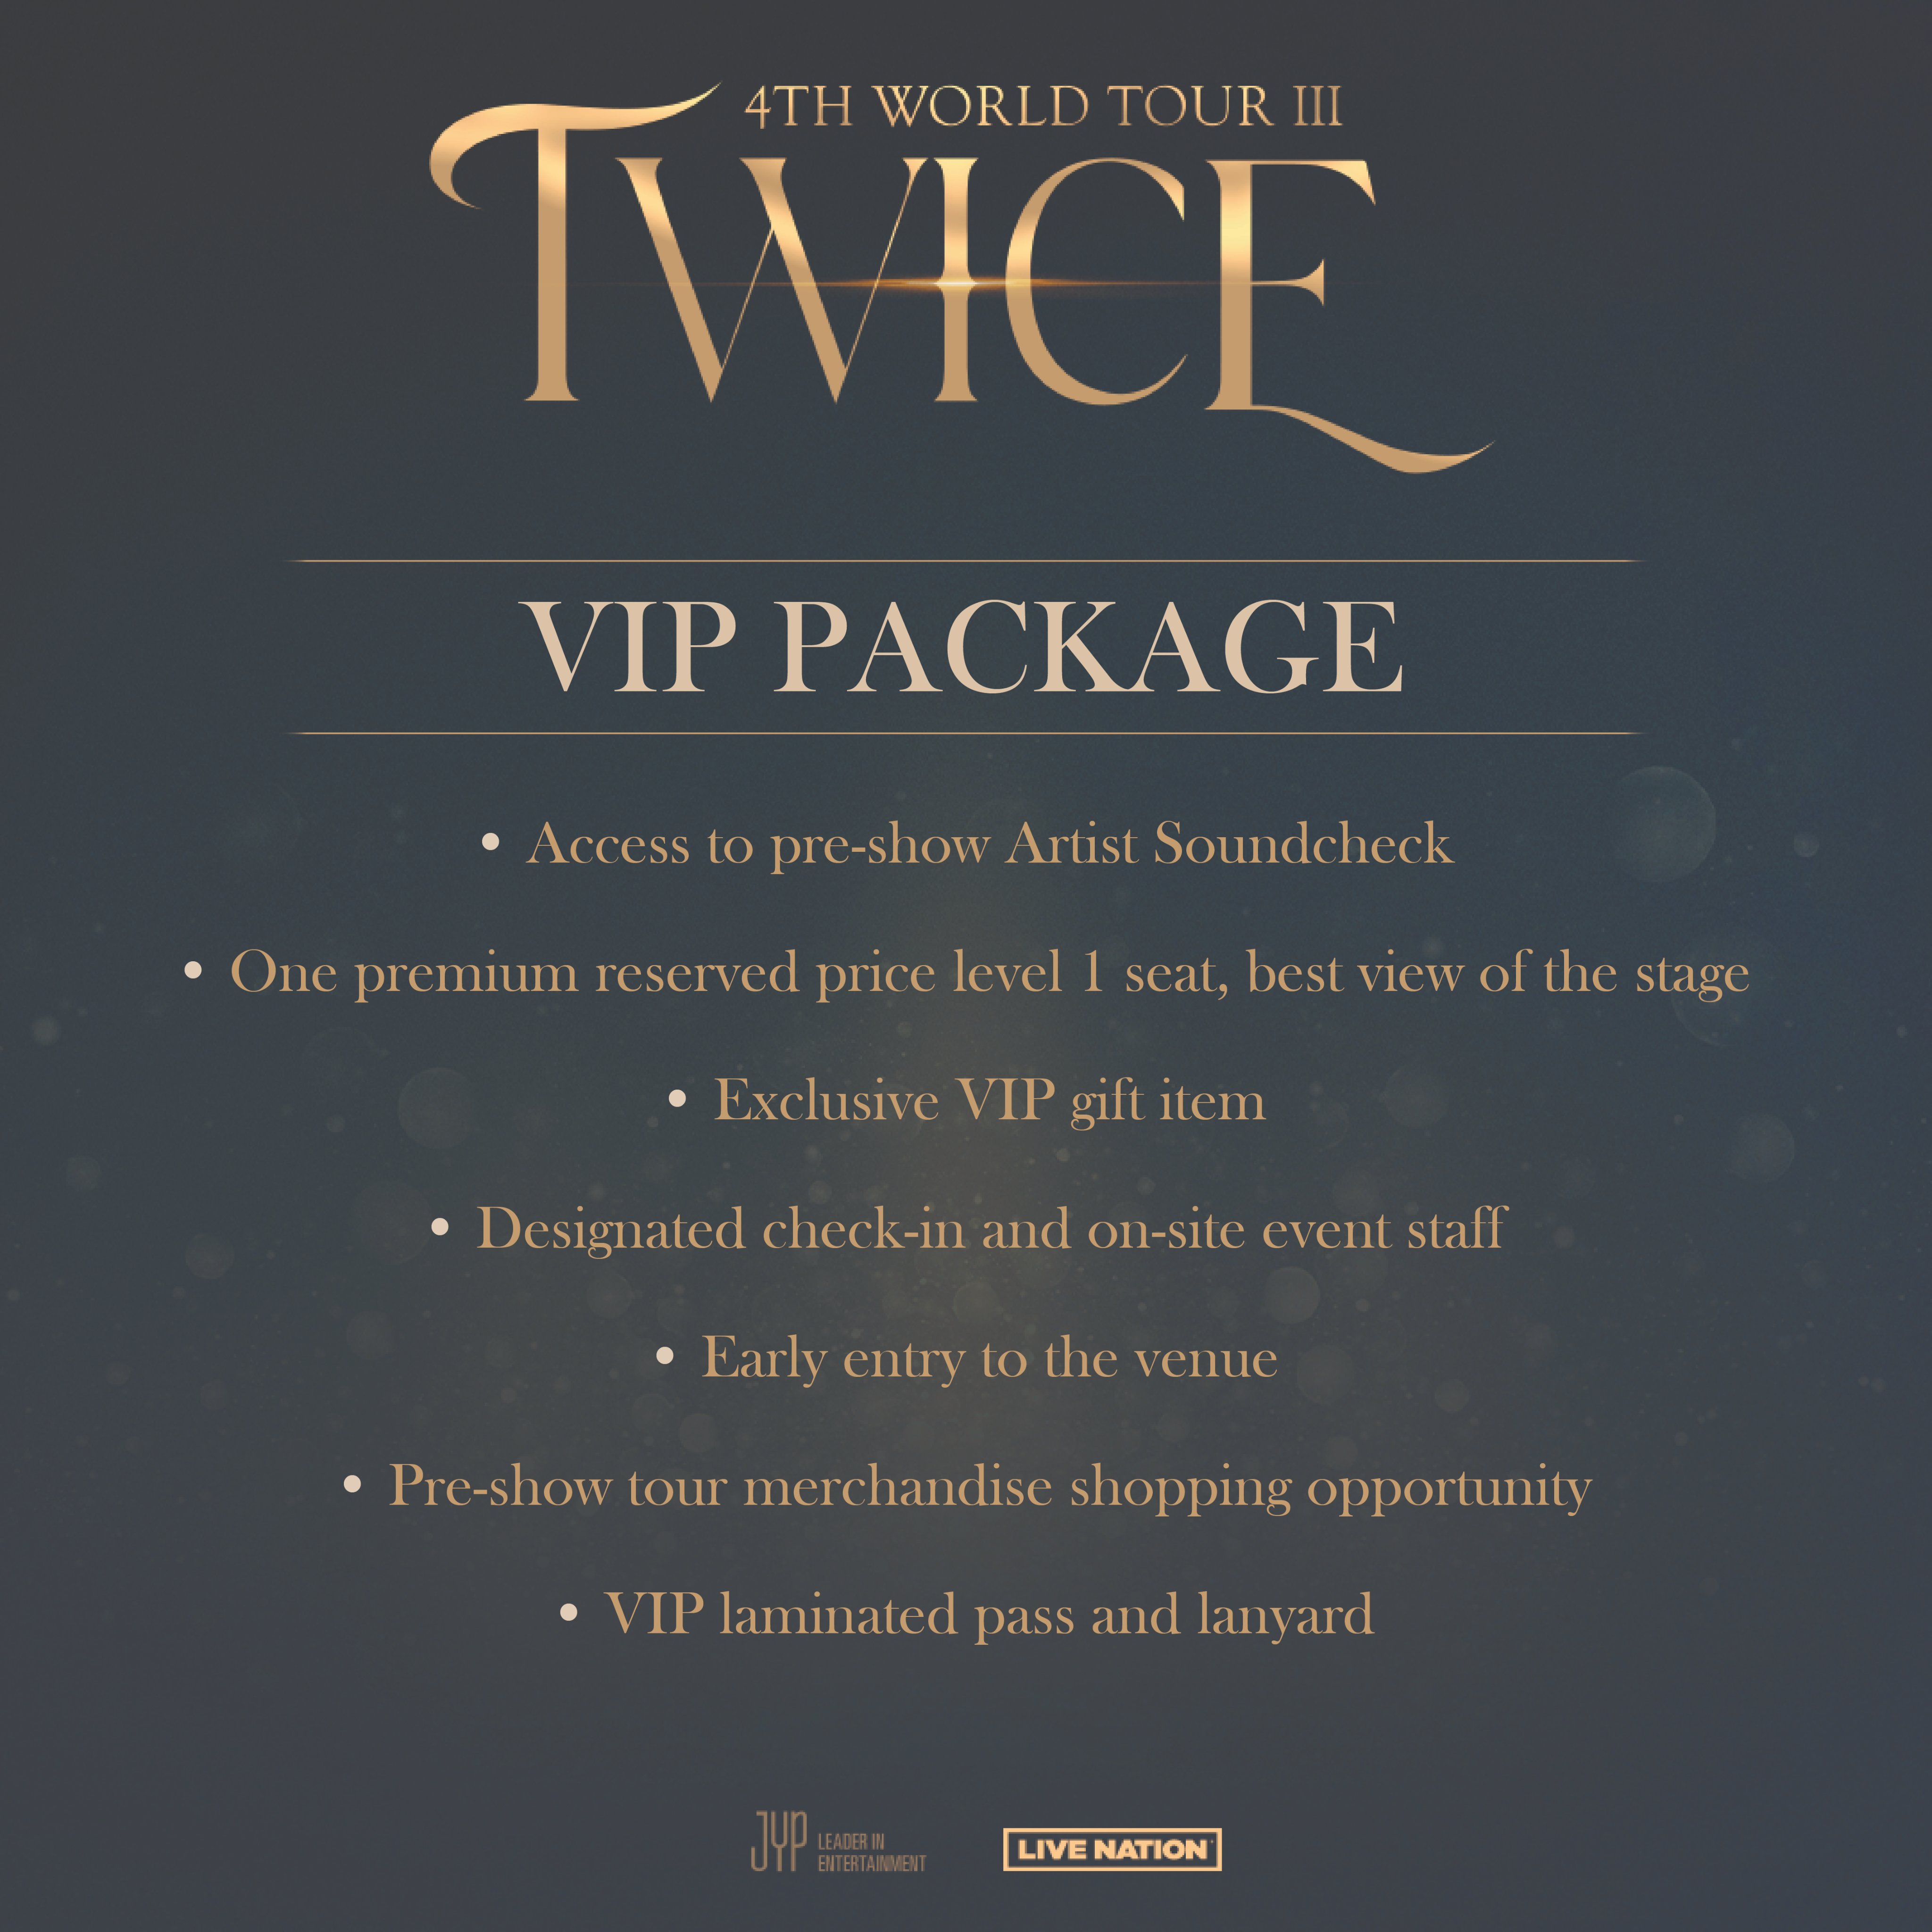 The Kia Forum Twice Jypetwice 4th World Tour Ticket Details Tickets On Sale Friday 12 10 At 3pm Pt Also Check Out T Co Hvcnptpmea For Vip Package Details Don T Miss